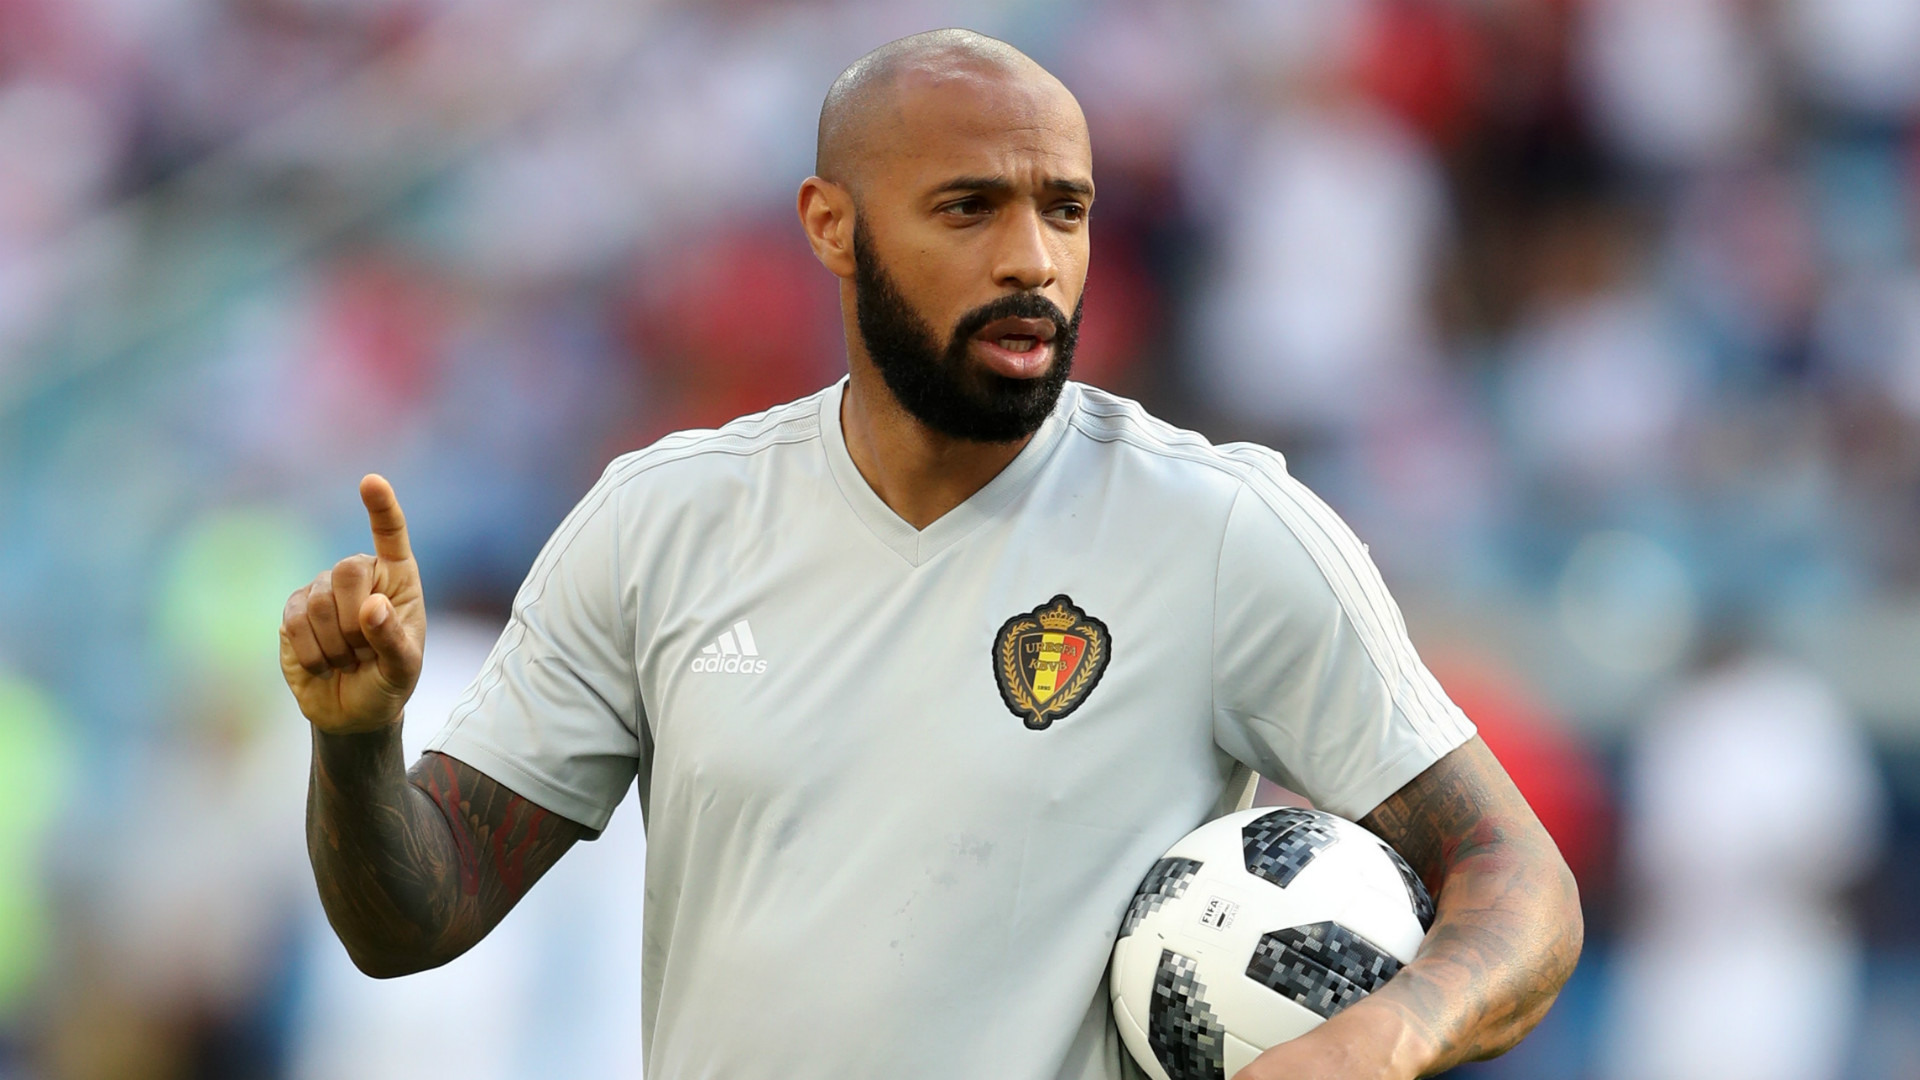 Arsenal legend Henry in talks over Egypt managerial role